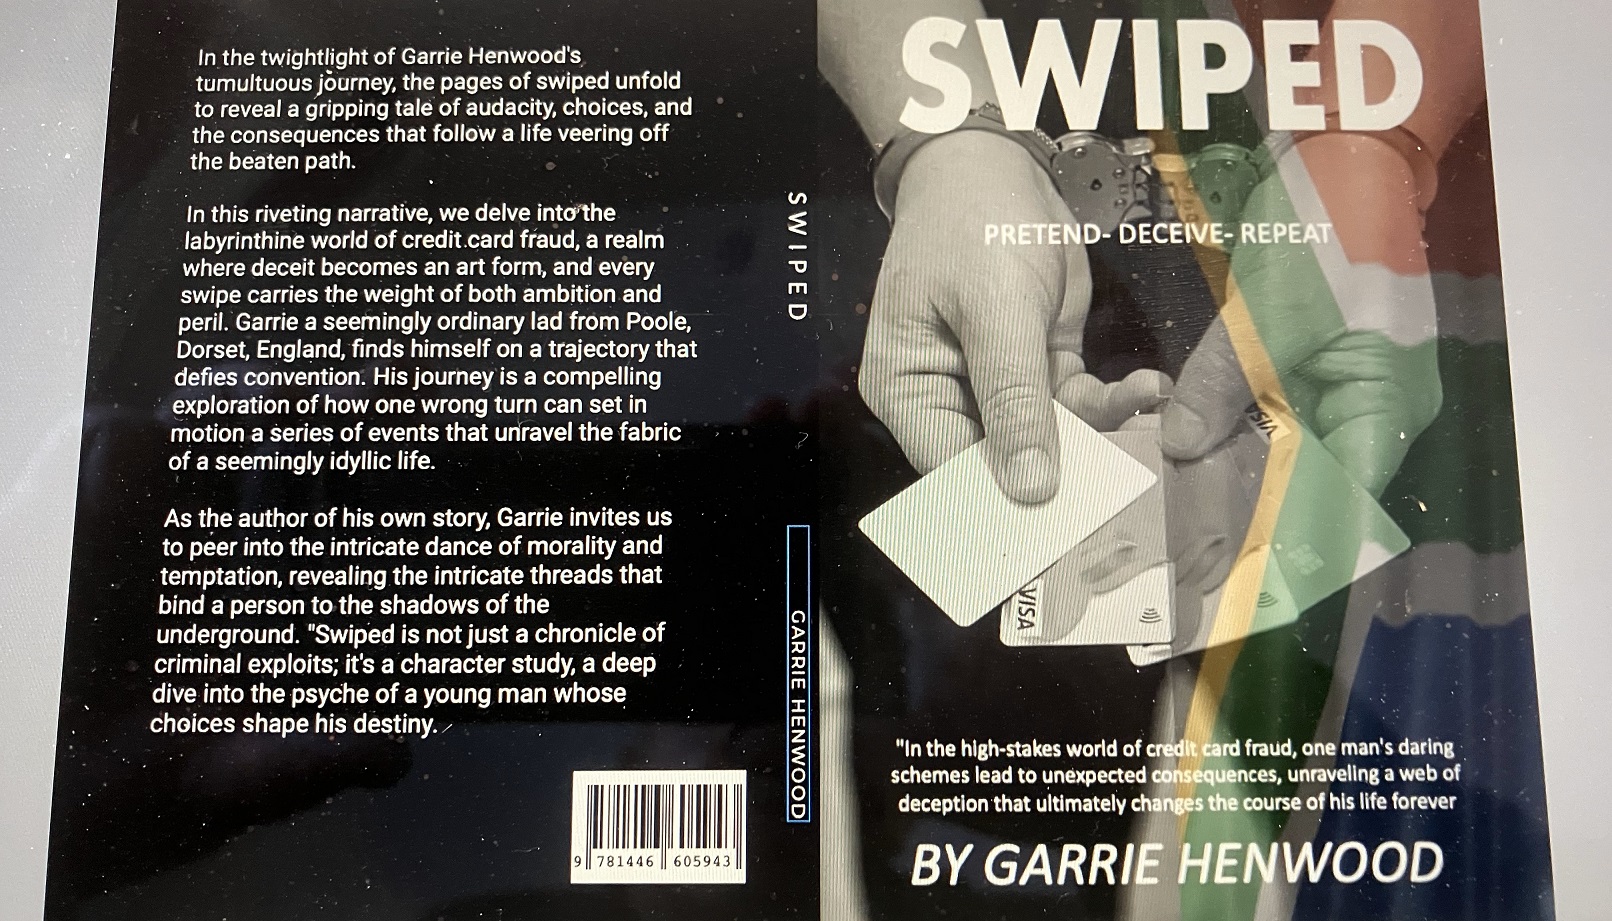 "Swiped" a True Crime Autobiography by Garrie Henwood, Explores Boundaries of Morality and Empathy